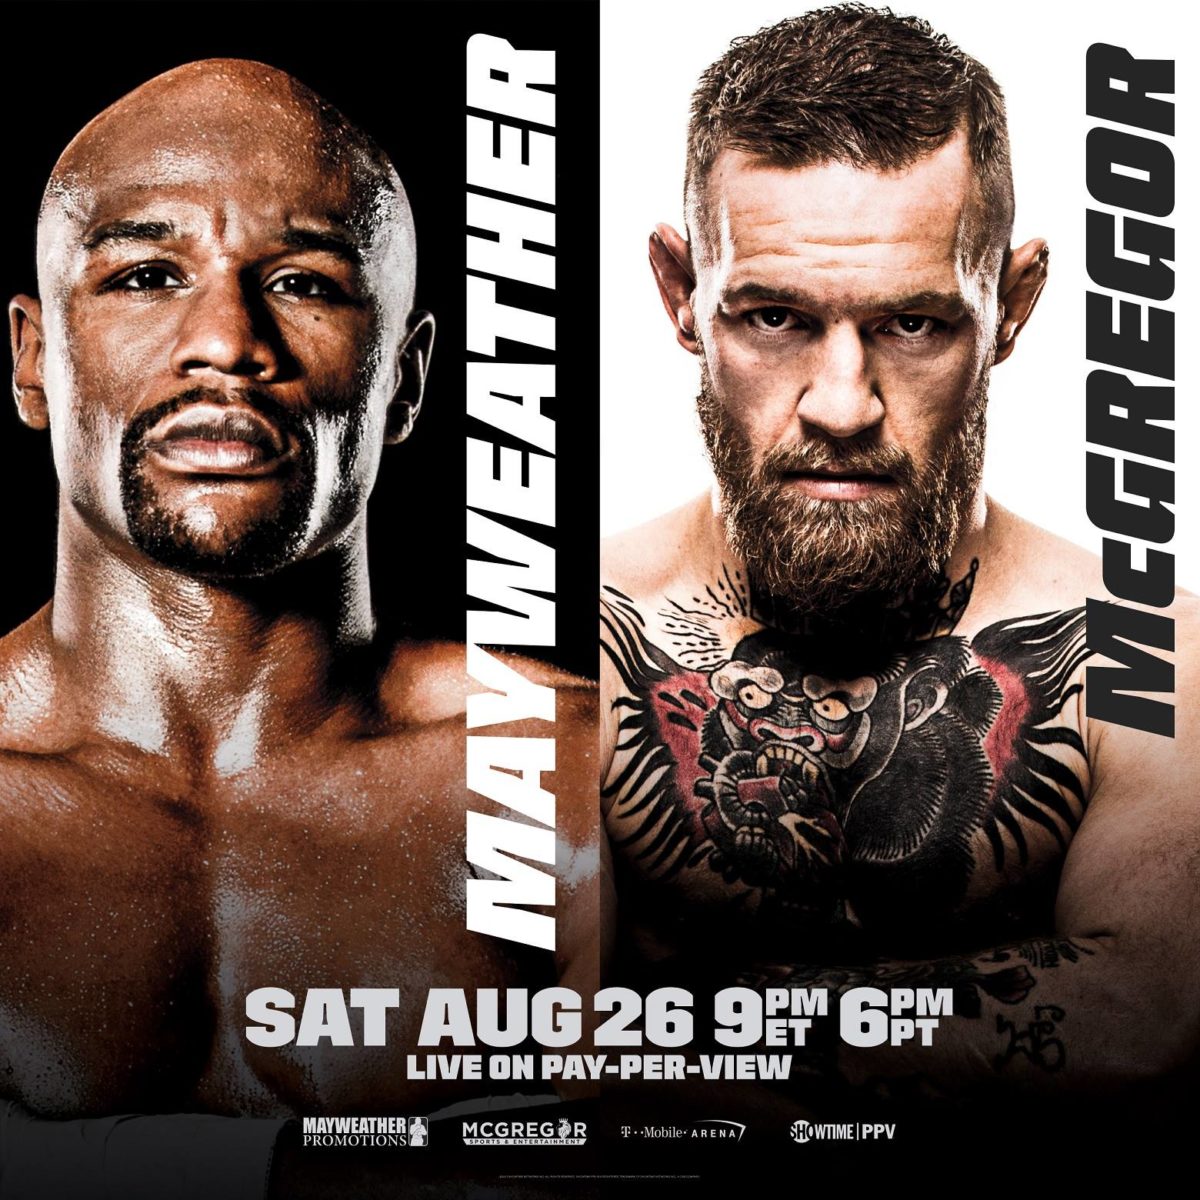 House of Blues is the place to watch the Mayweather vs. McGregor spectacle in Boston ...